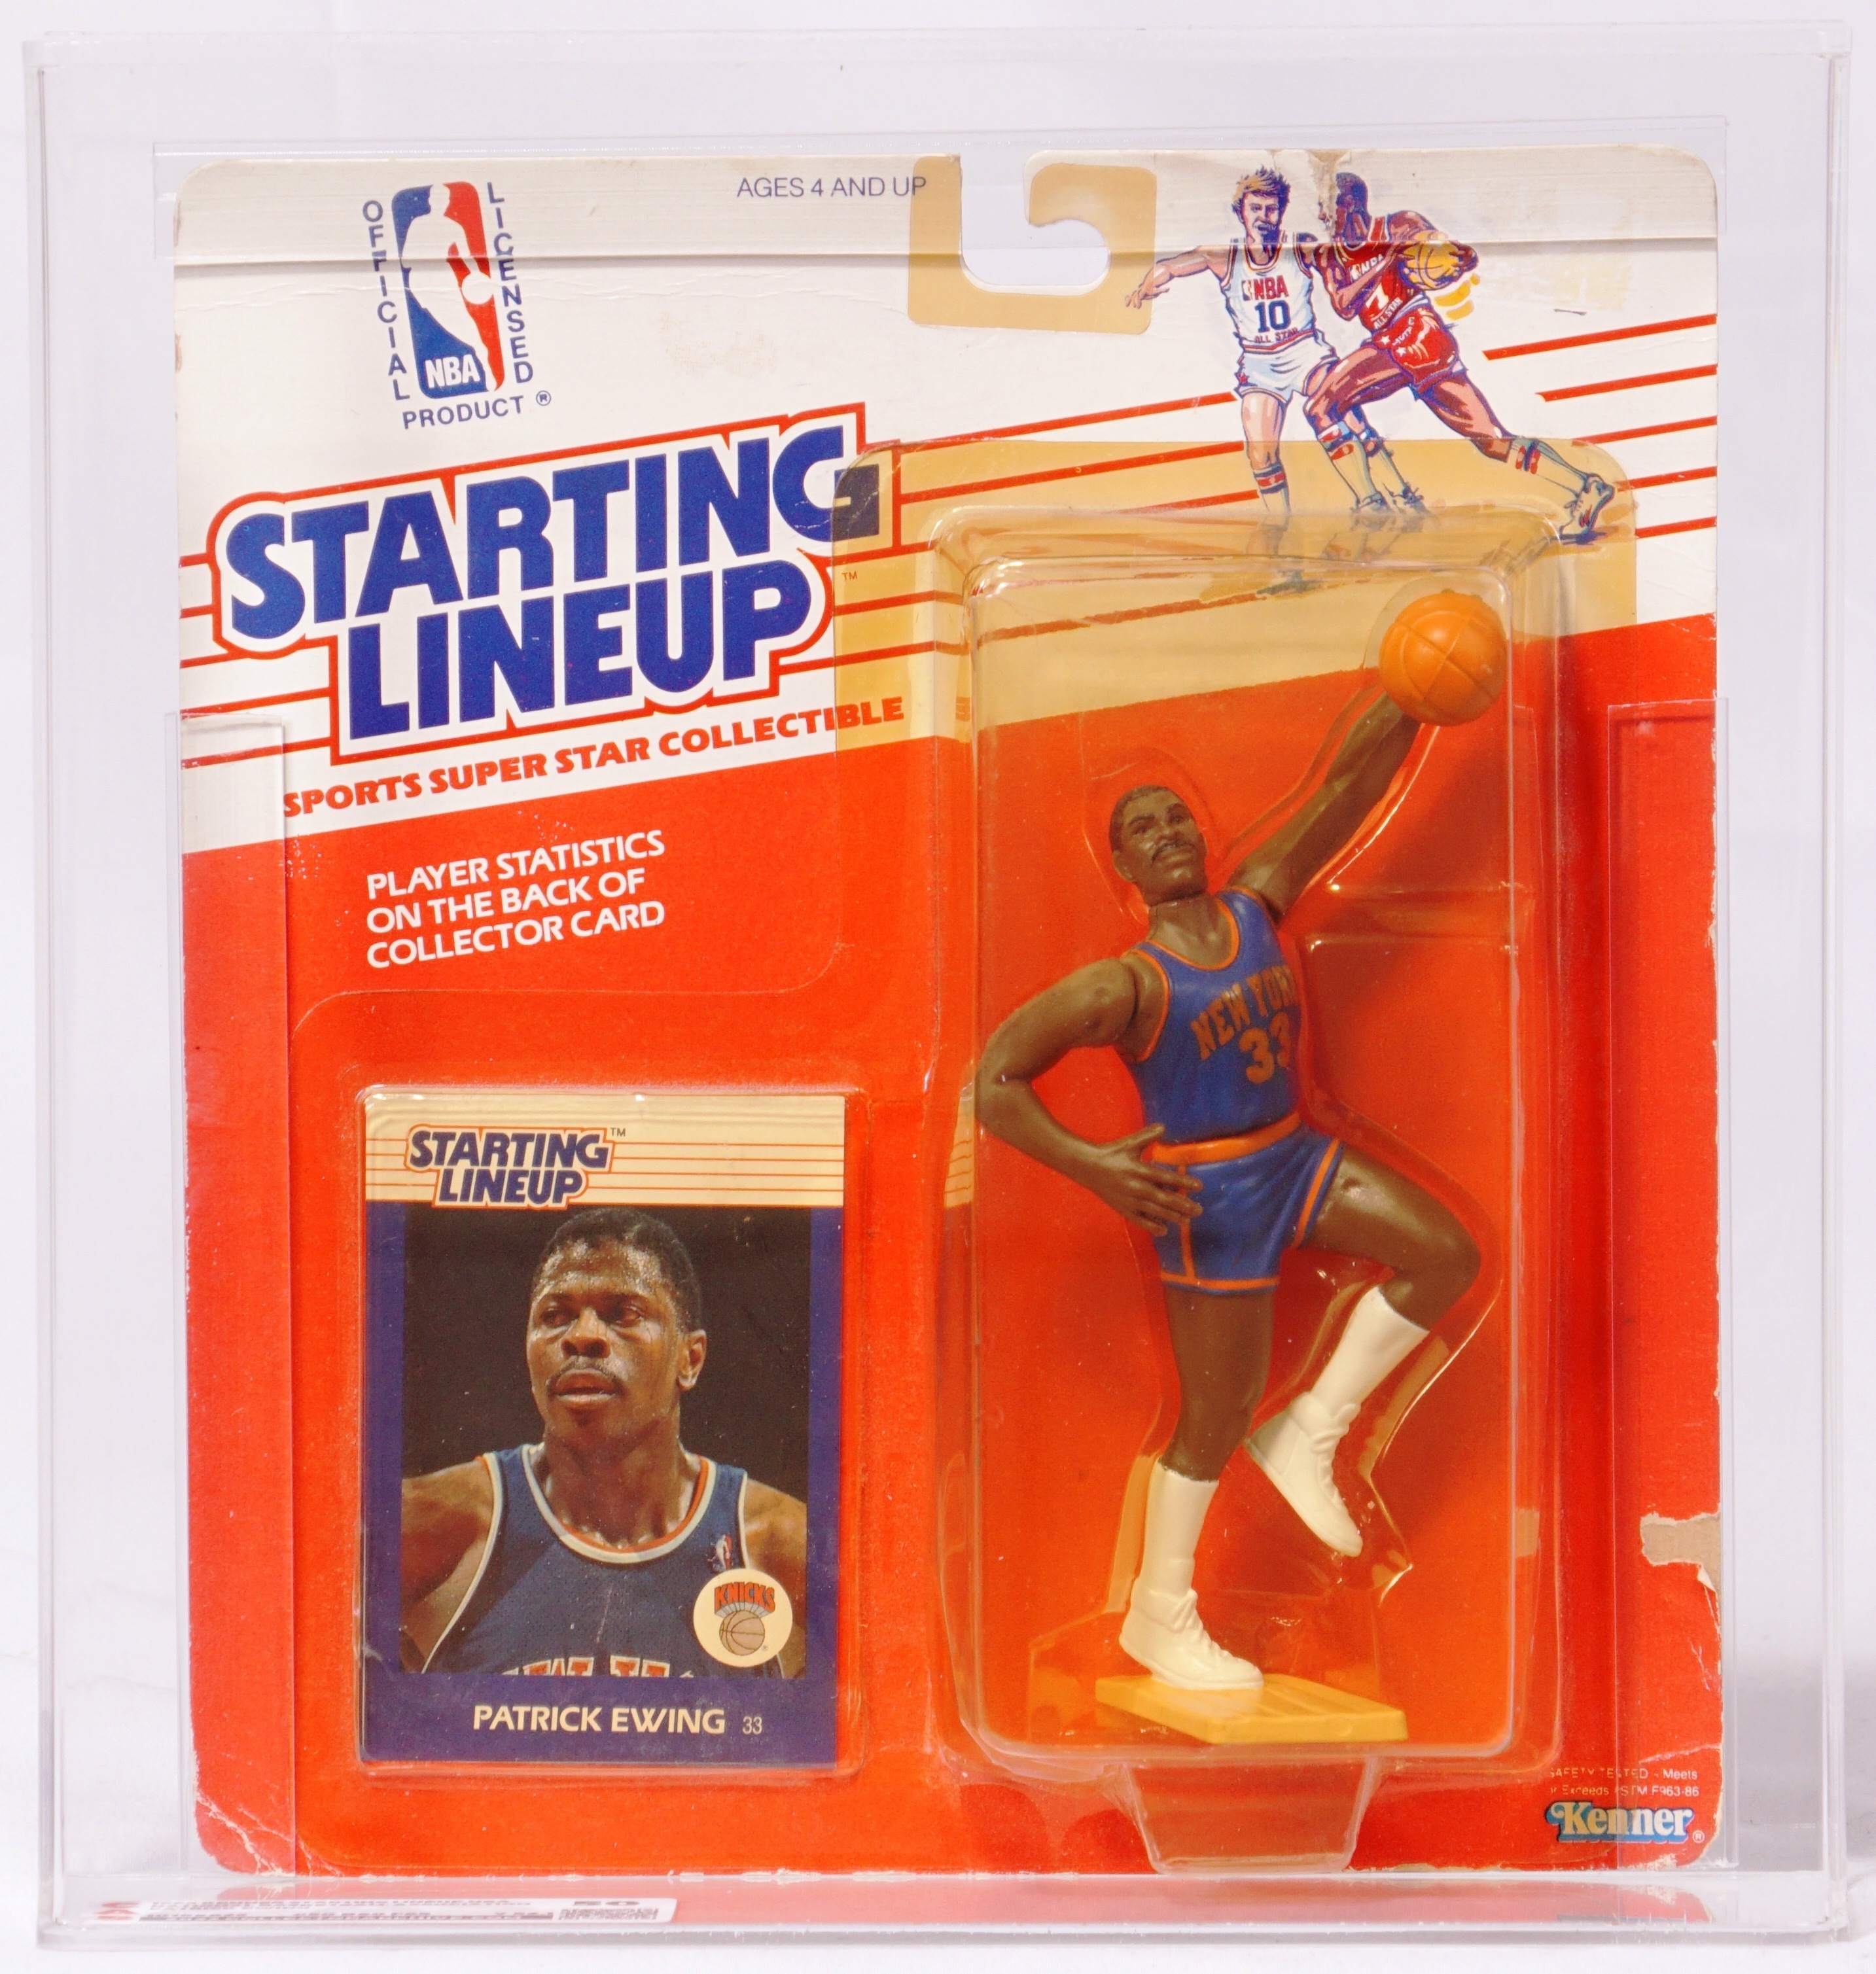 1988 Kenner Starting Lineup NBA Carded Sports Figure - Patrick Ewing